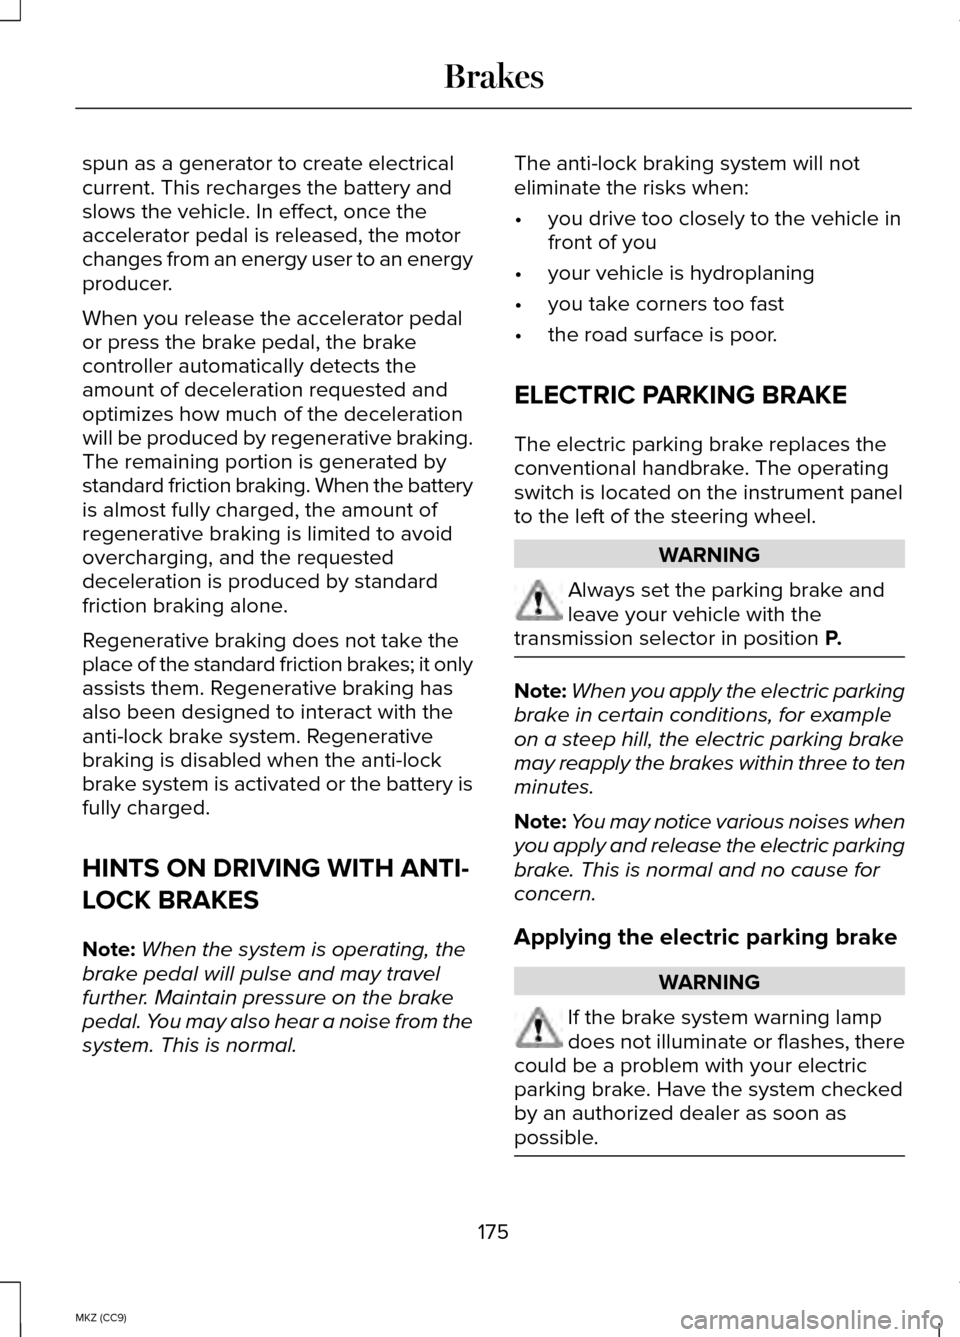 LINCOLN MKZ HYBRID 2014 User Guide spun as a generator to create electrical
current. This recharges the battery and
slows the vehicle. In effect, once the
accelerator pedal is released, the motor
changes from an energy user to an energ